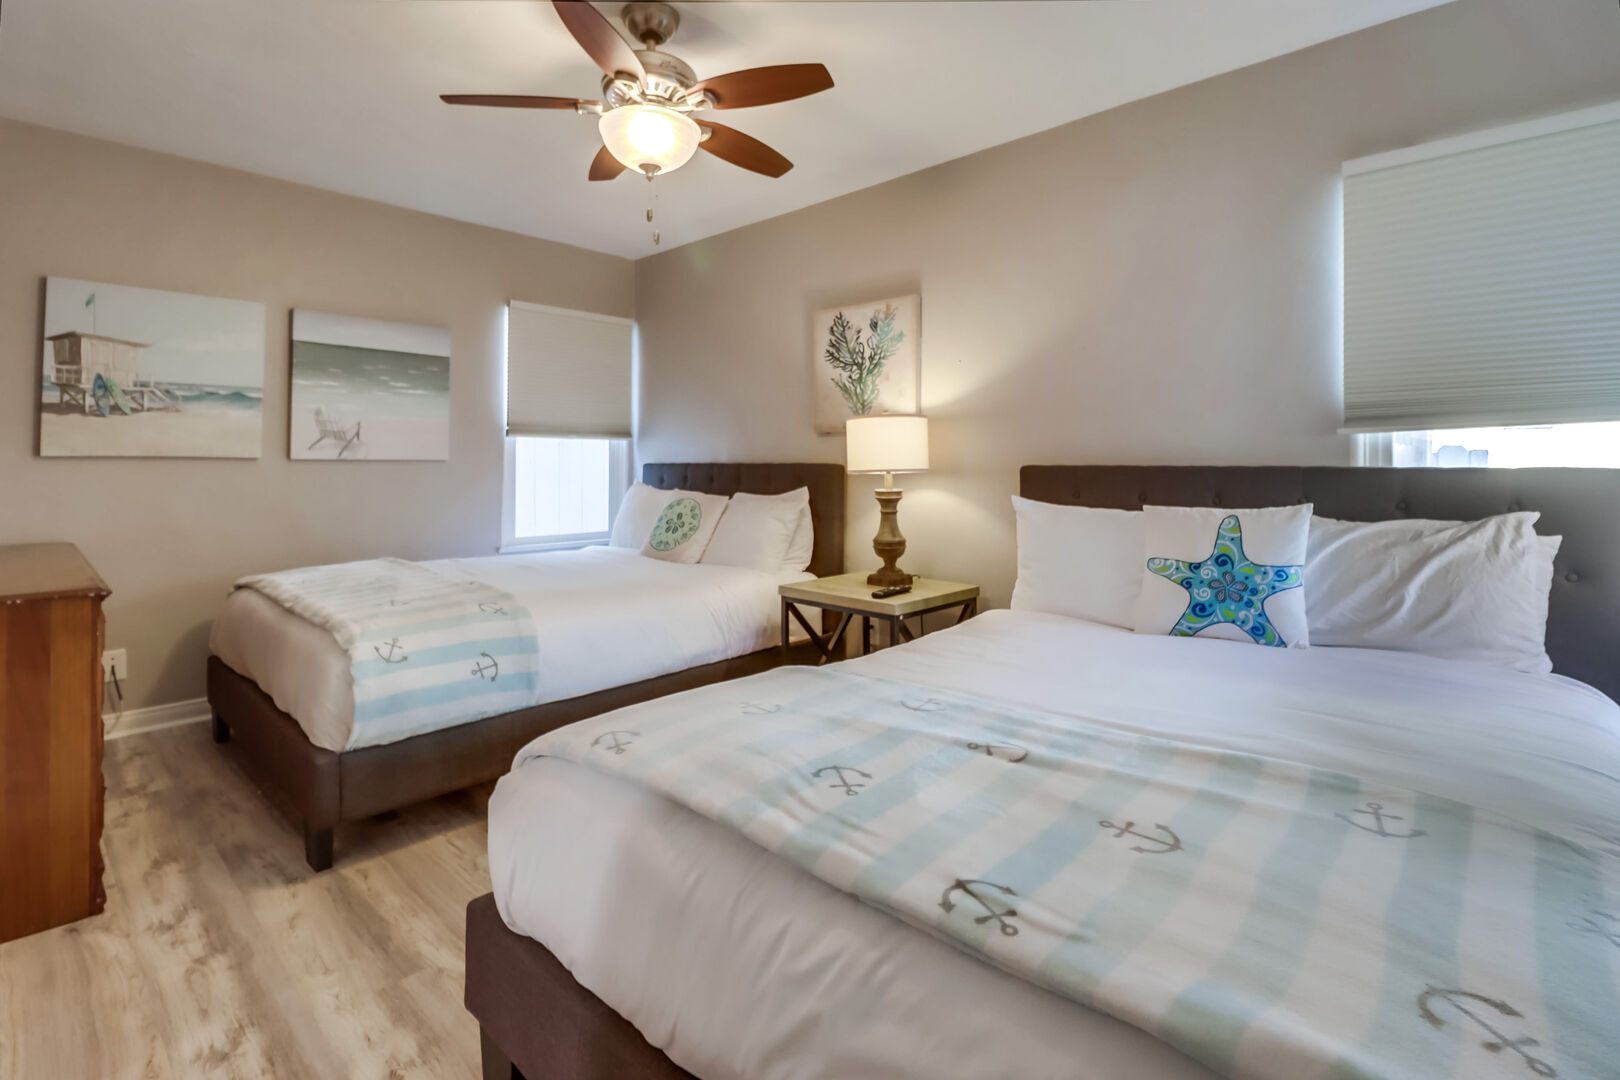 Lower level guest room with 2 queen beds, ceiling fan, dresser, closet and smart TV